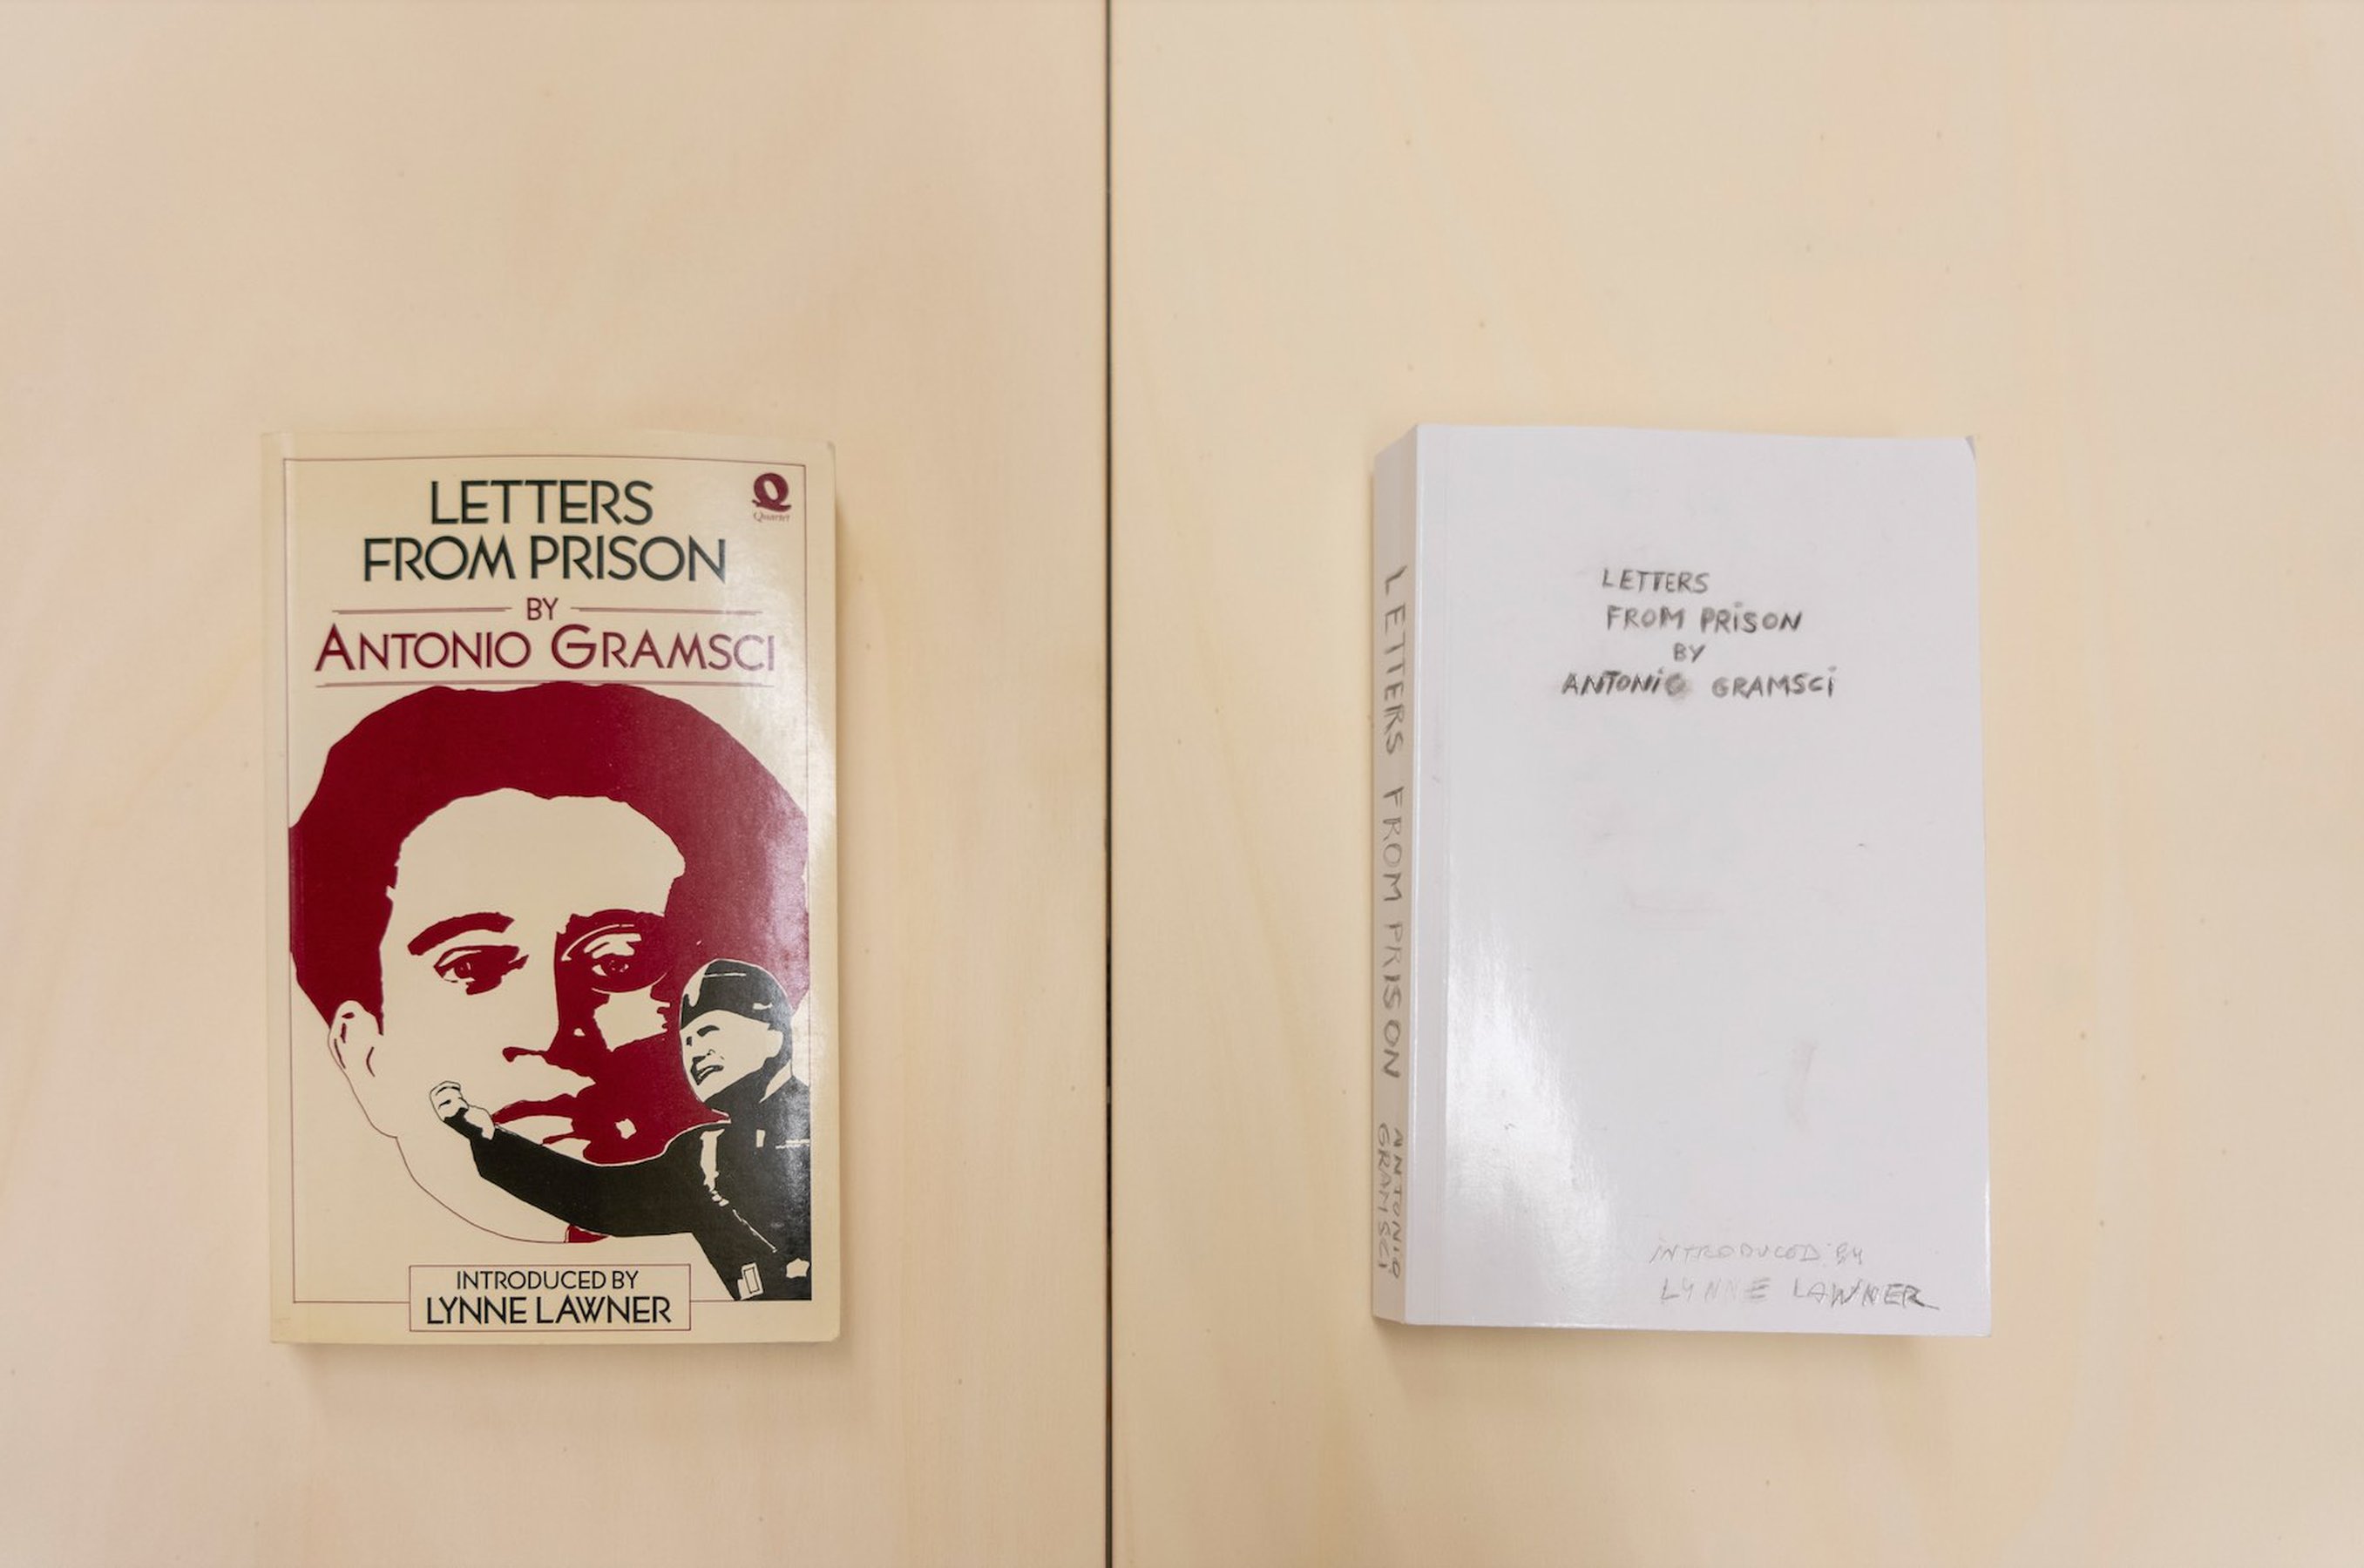 Annotated Books series, "Letters from Prison, A. Gramsci"